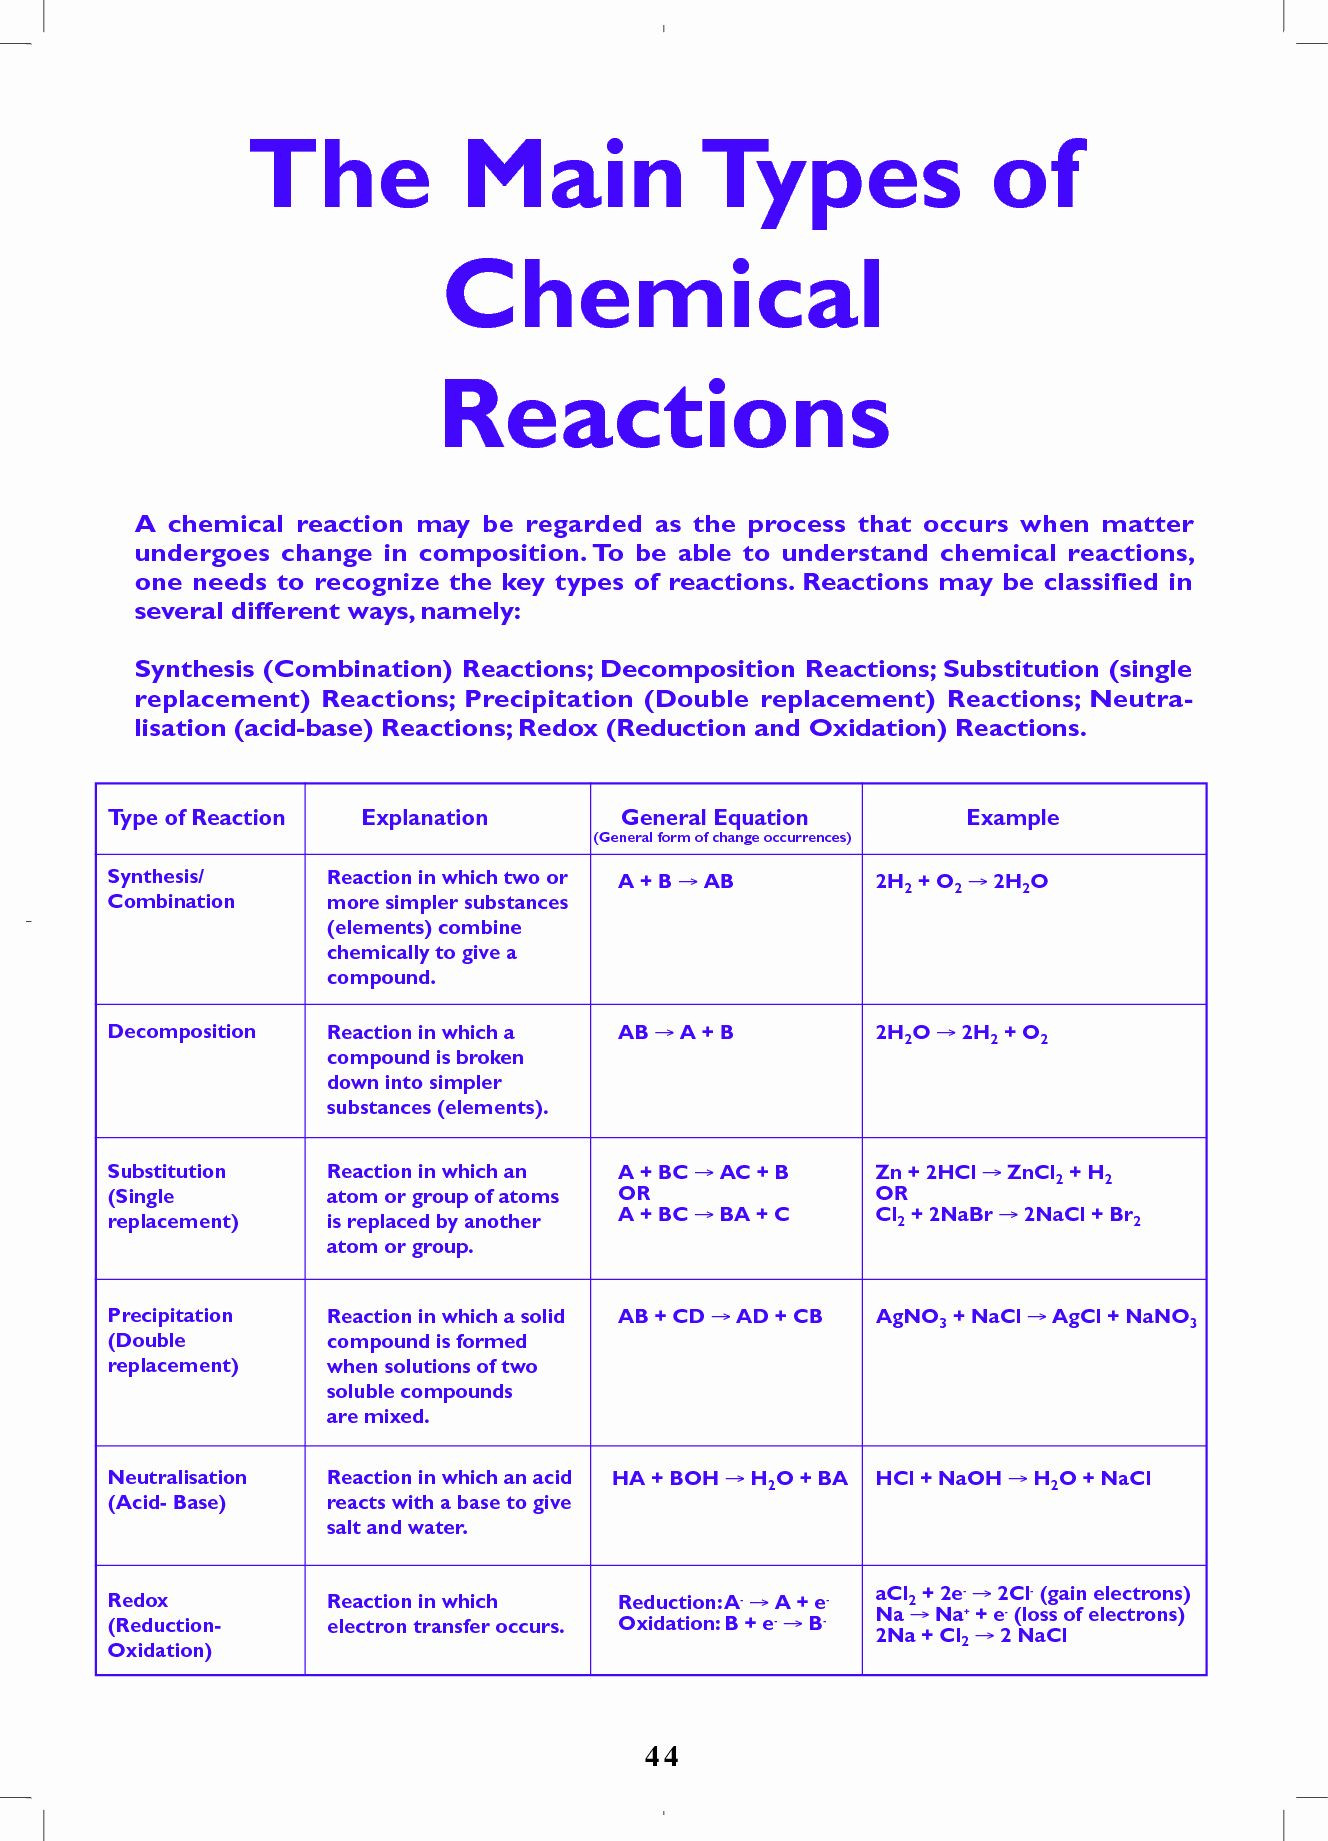 Chemical Reactions Types Worksheet Chemical Reactions Types Worksheet Awesome Types Chemical